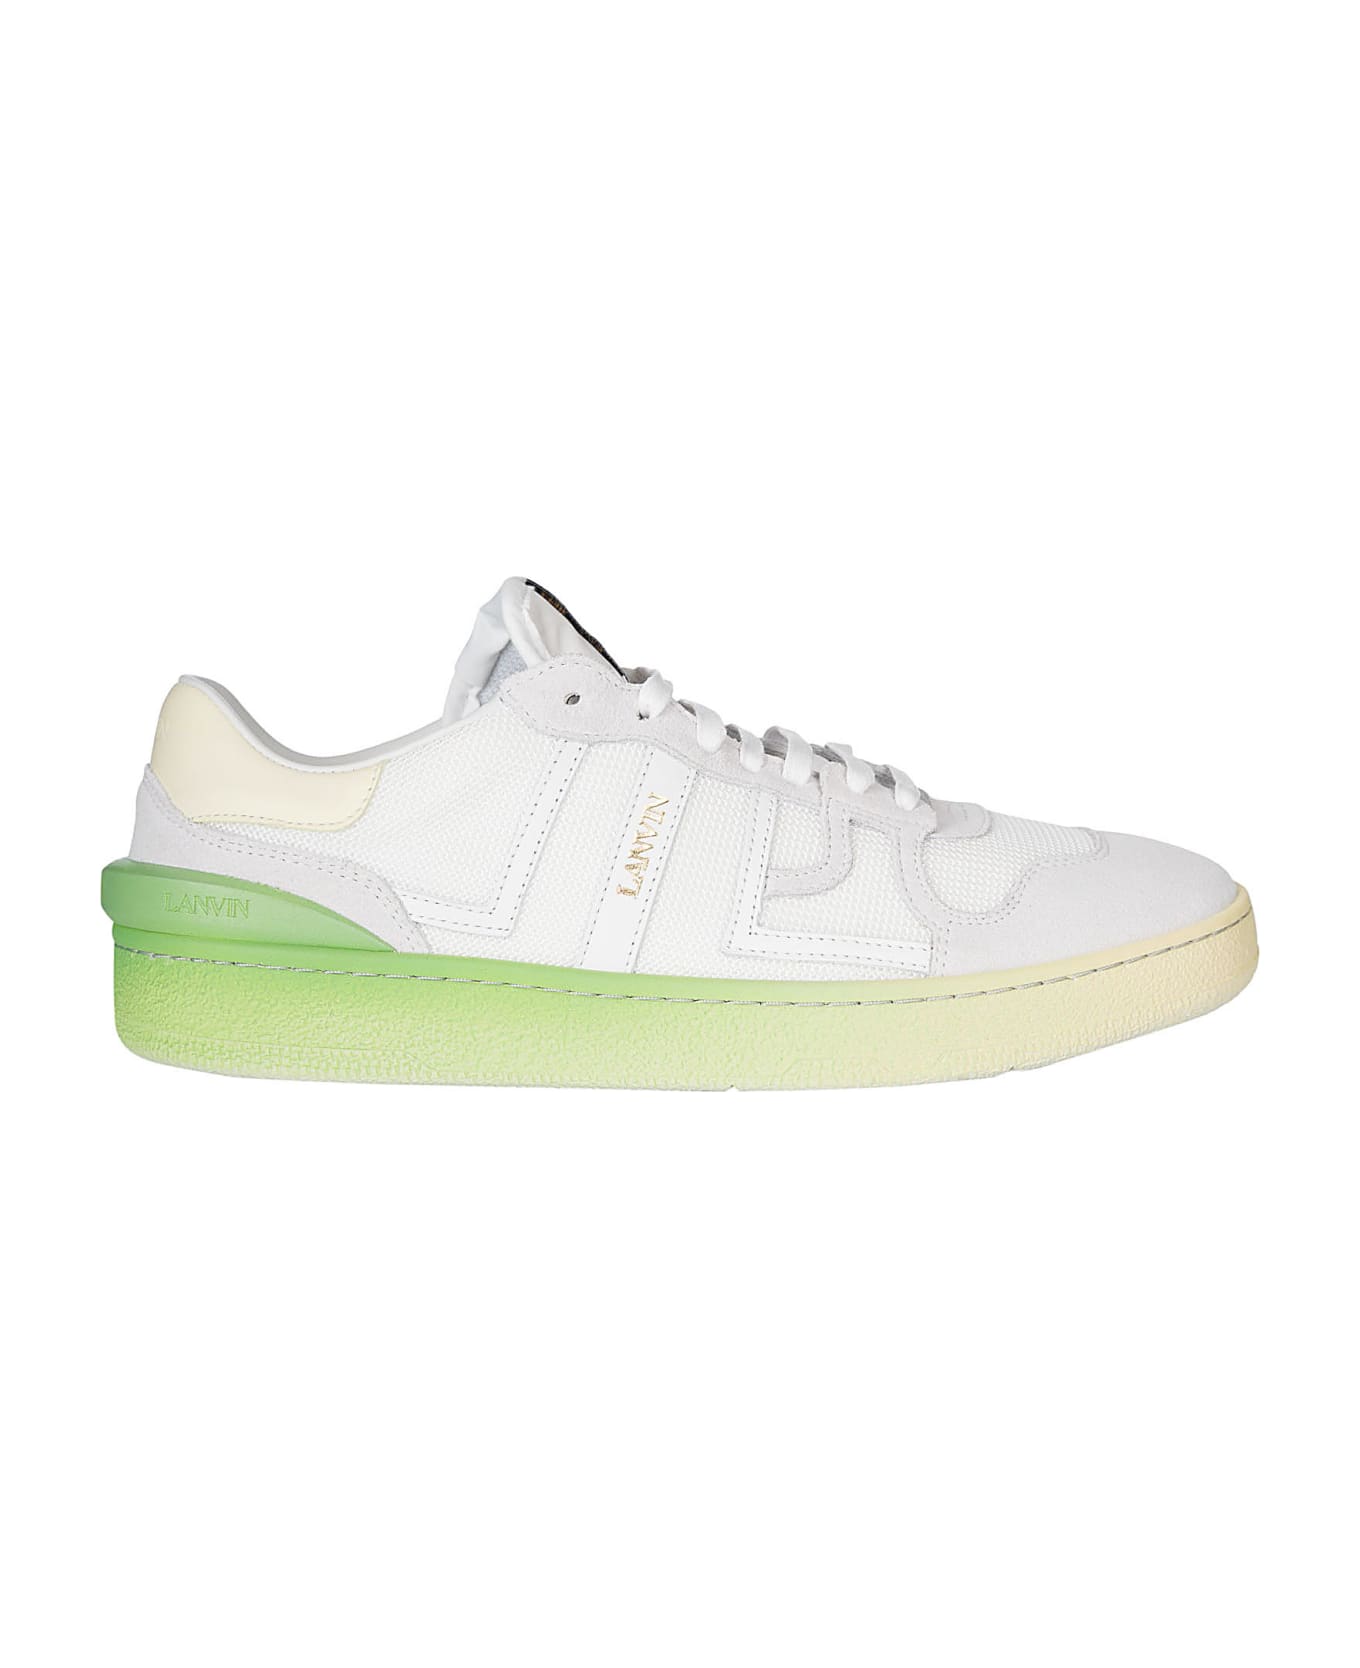 Lanvin Clay Low Top Sneakers - White/Yellow スニーカー